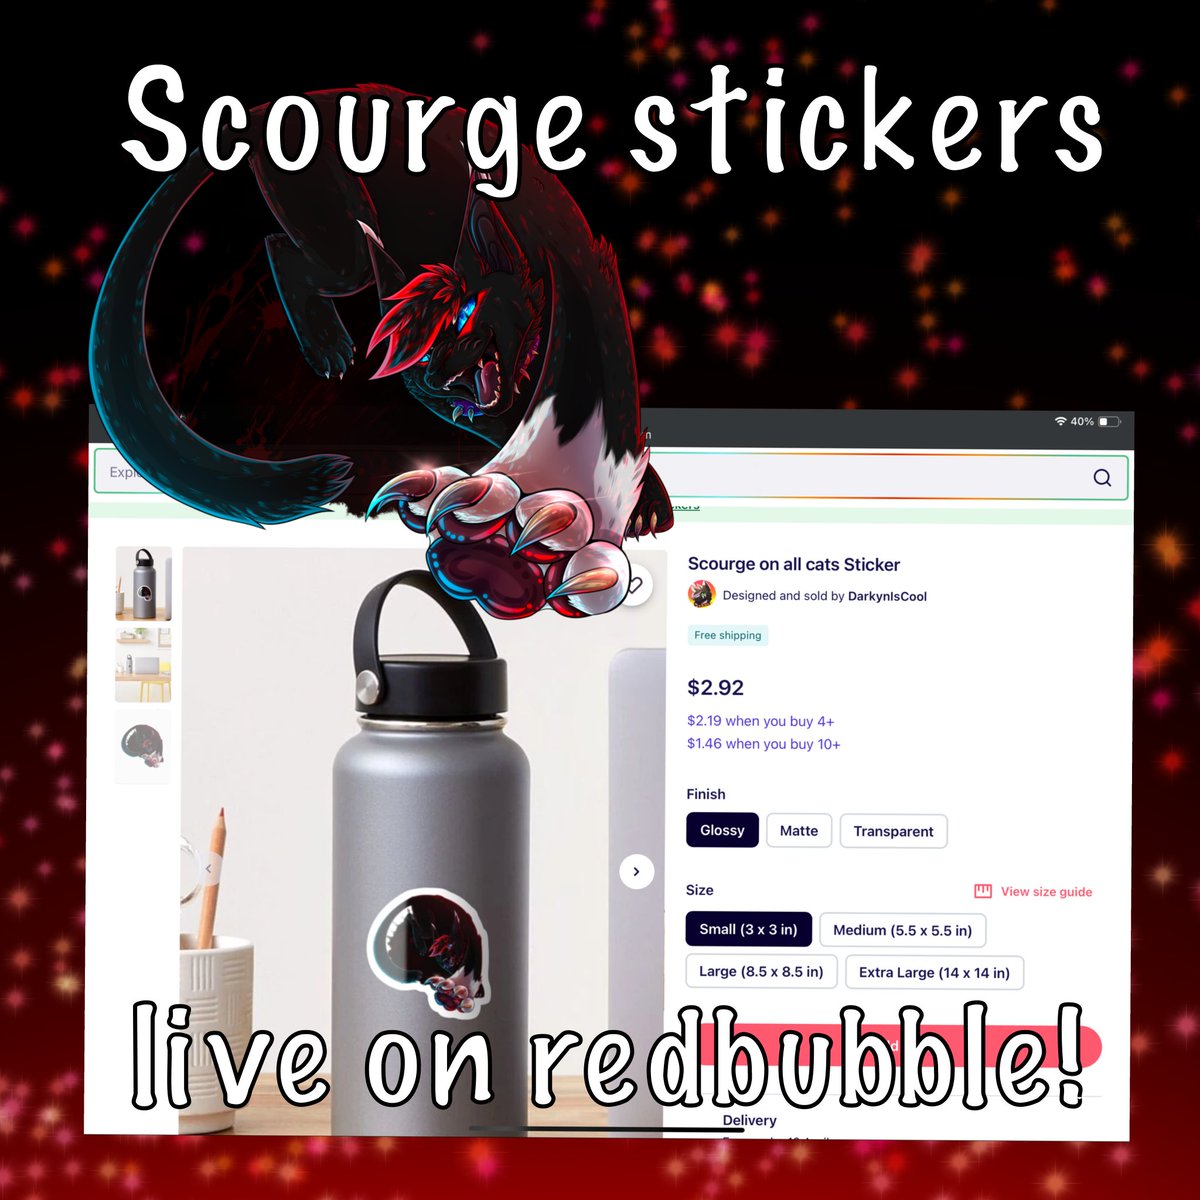 Scourge stickers up on redbubble!!

Please consider supporting me, every sale, retweet, like, etc are all heavily appreciated 

I haven't gotten the chance to get the acrylic keychains yet but hopefully this funds them!

🔗 Below Incase this app is hides this